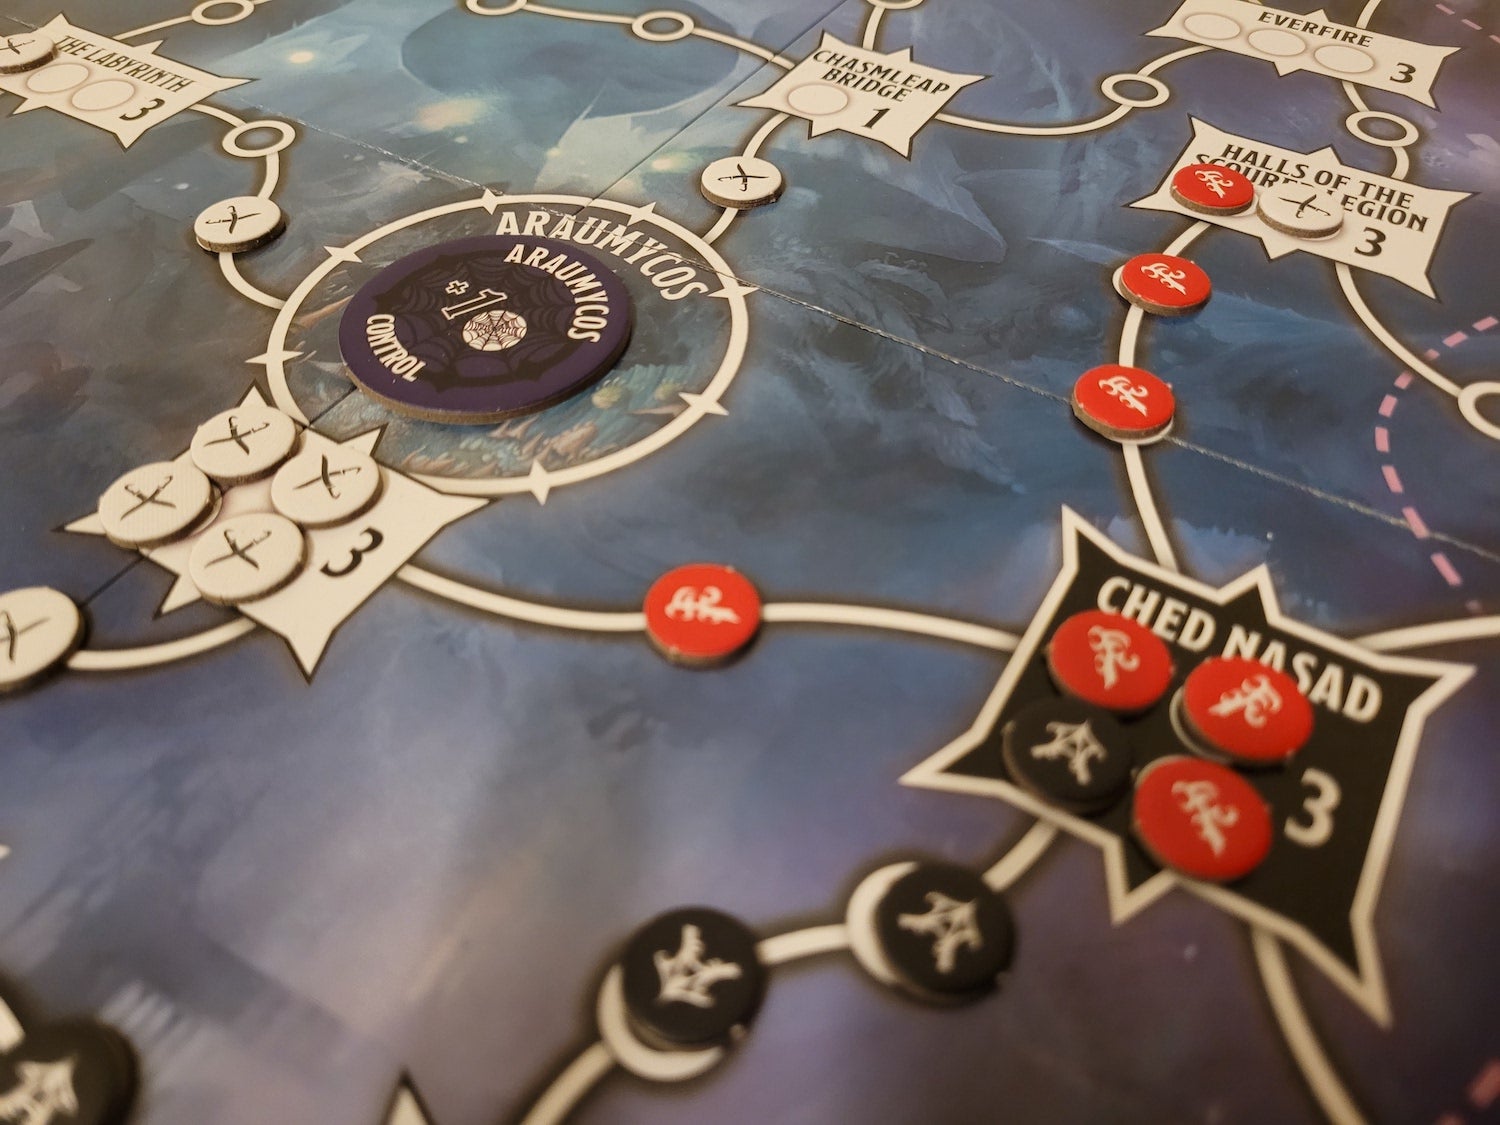 Tyrants of the Underdark Review